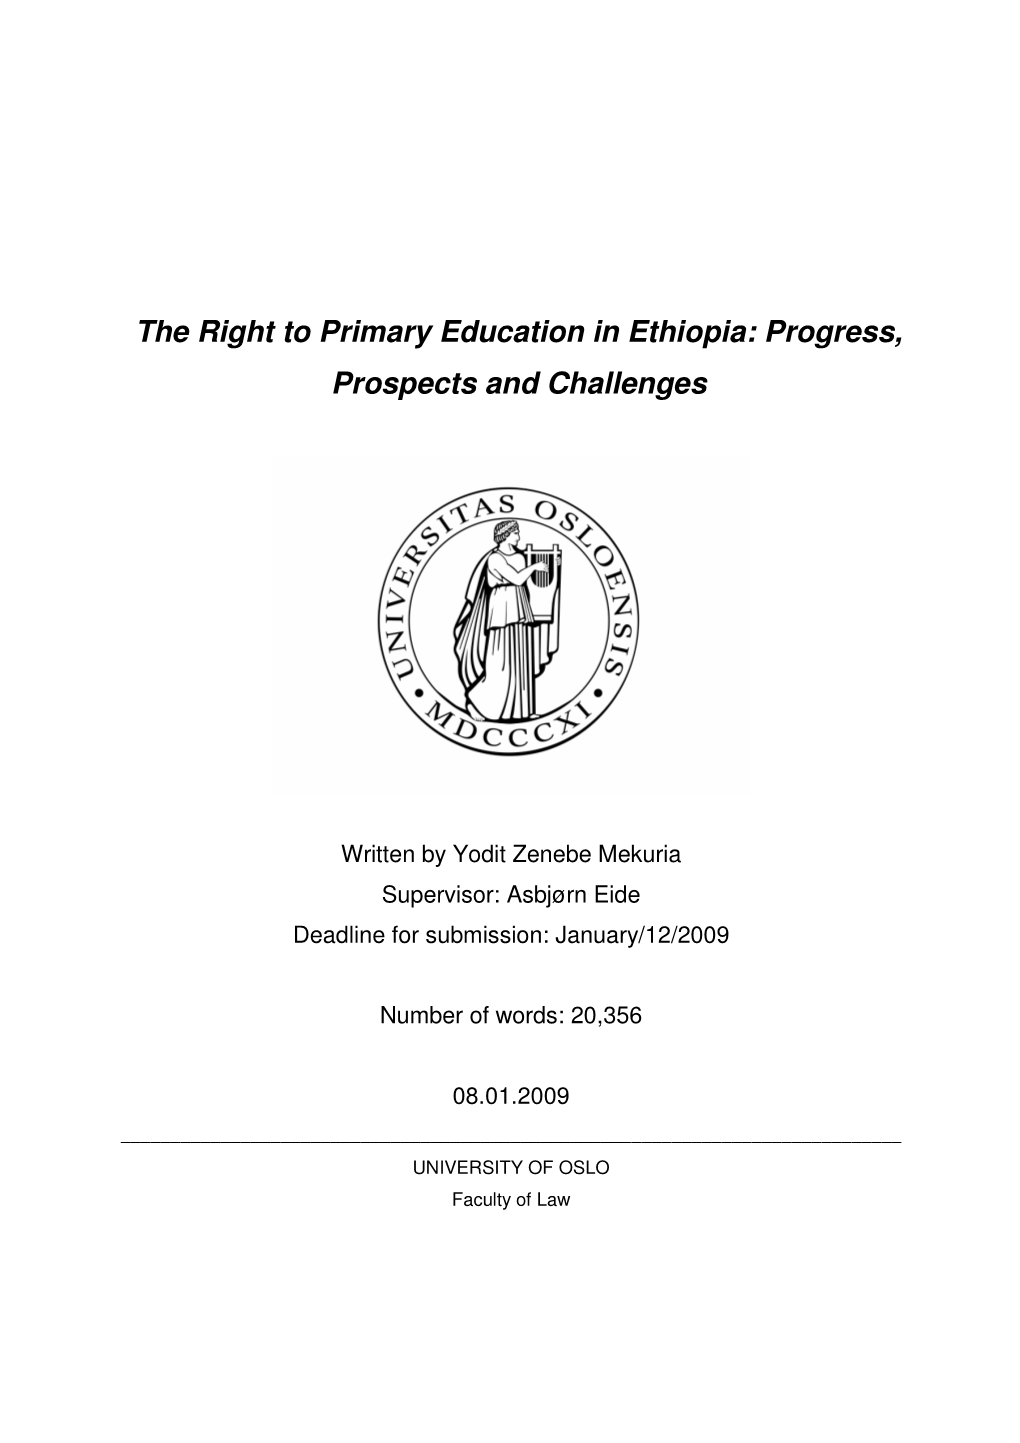 The Right to Primary Education in Ethiopia: Progress, Prospects and Challenges